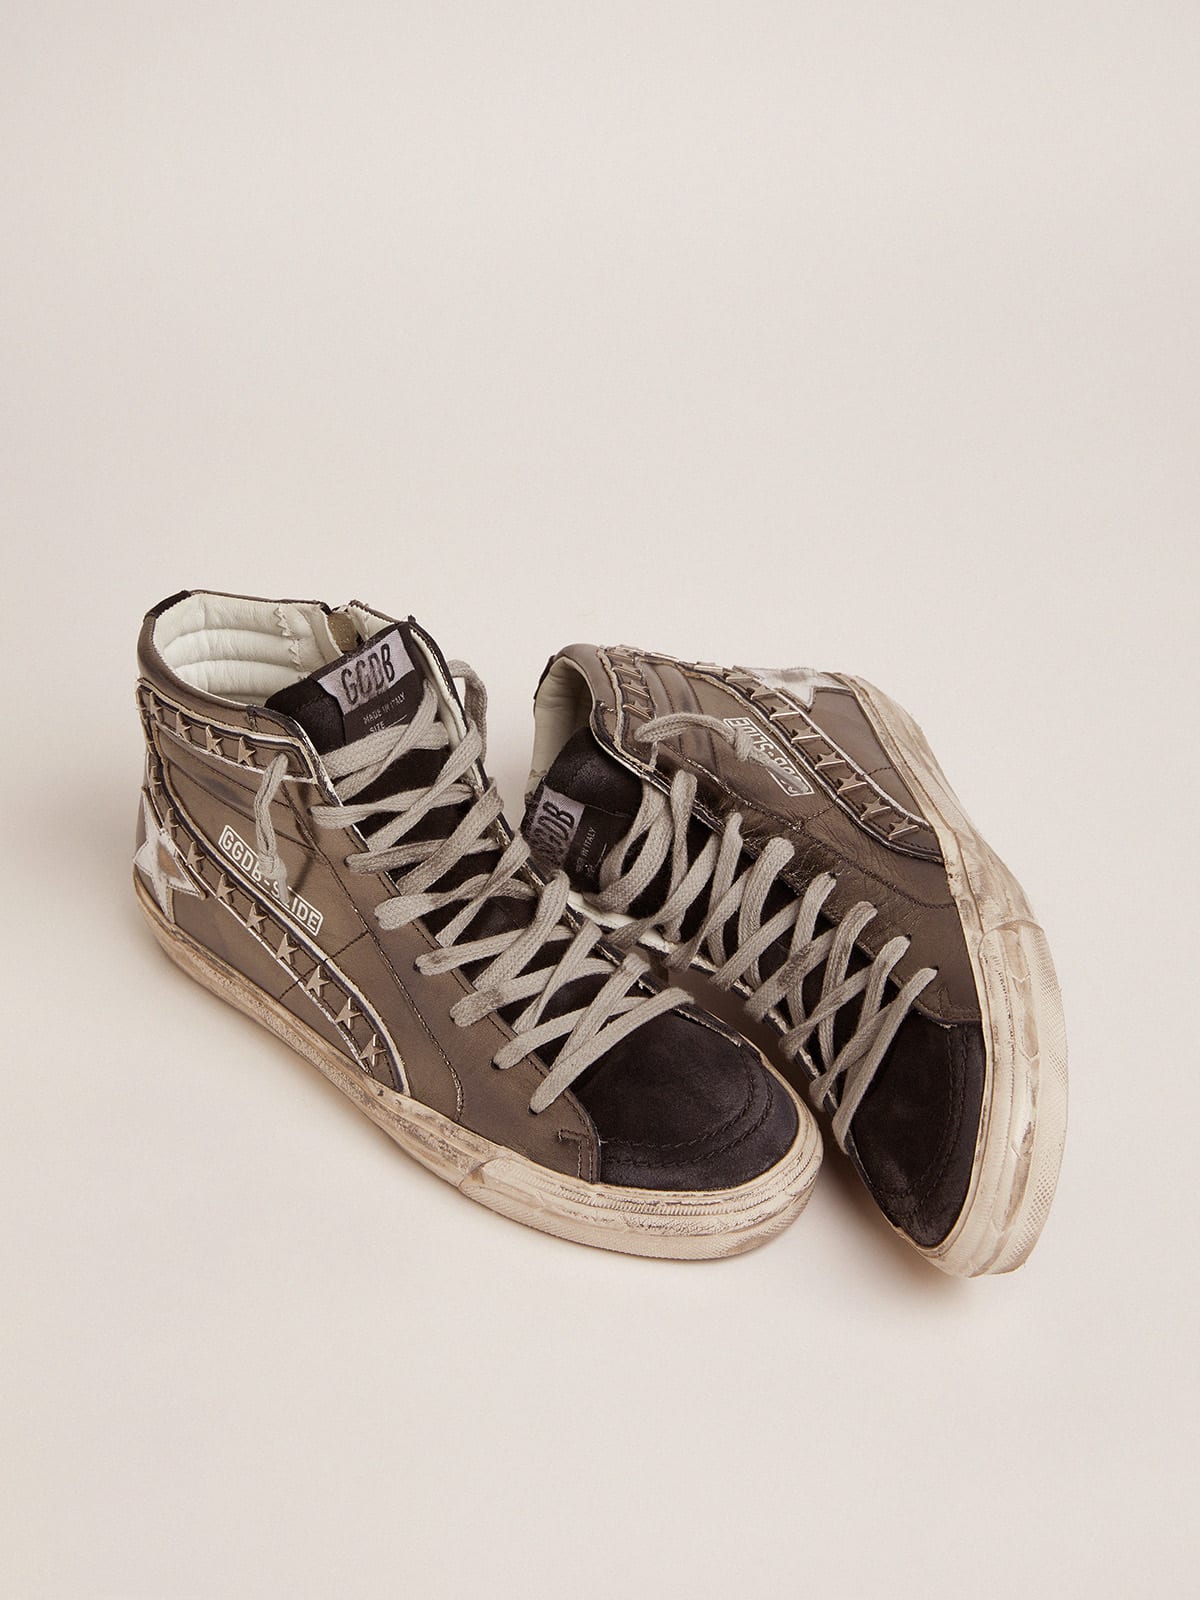 Golden Goose - Women's Slide with silver laminated leather upper and studs in 